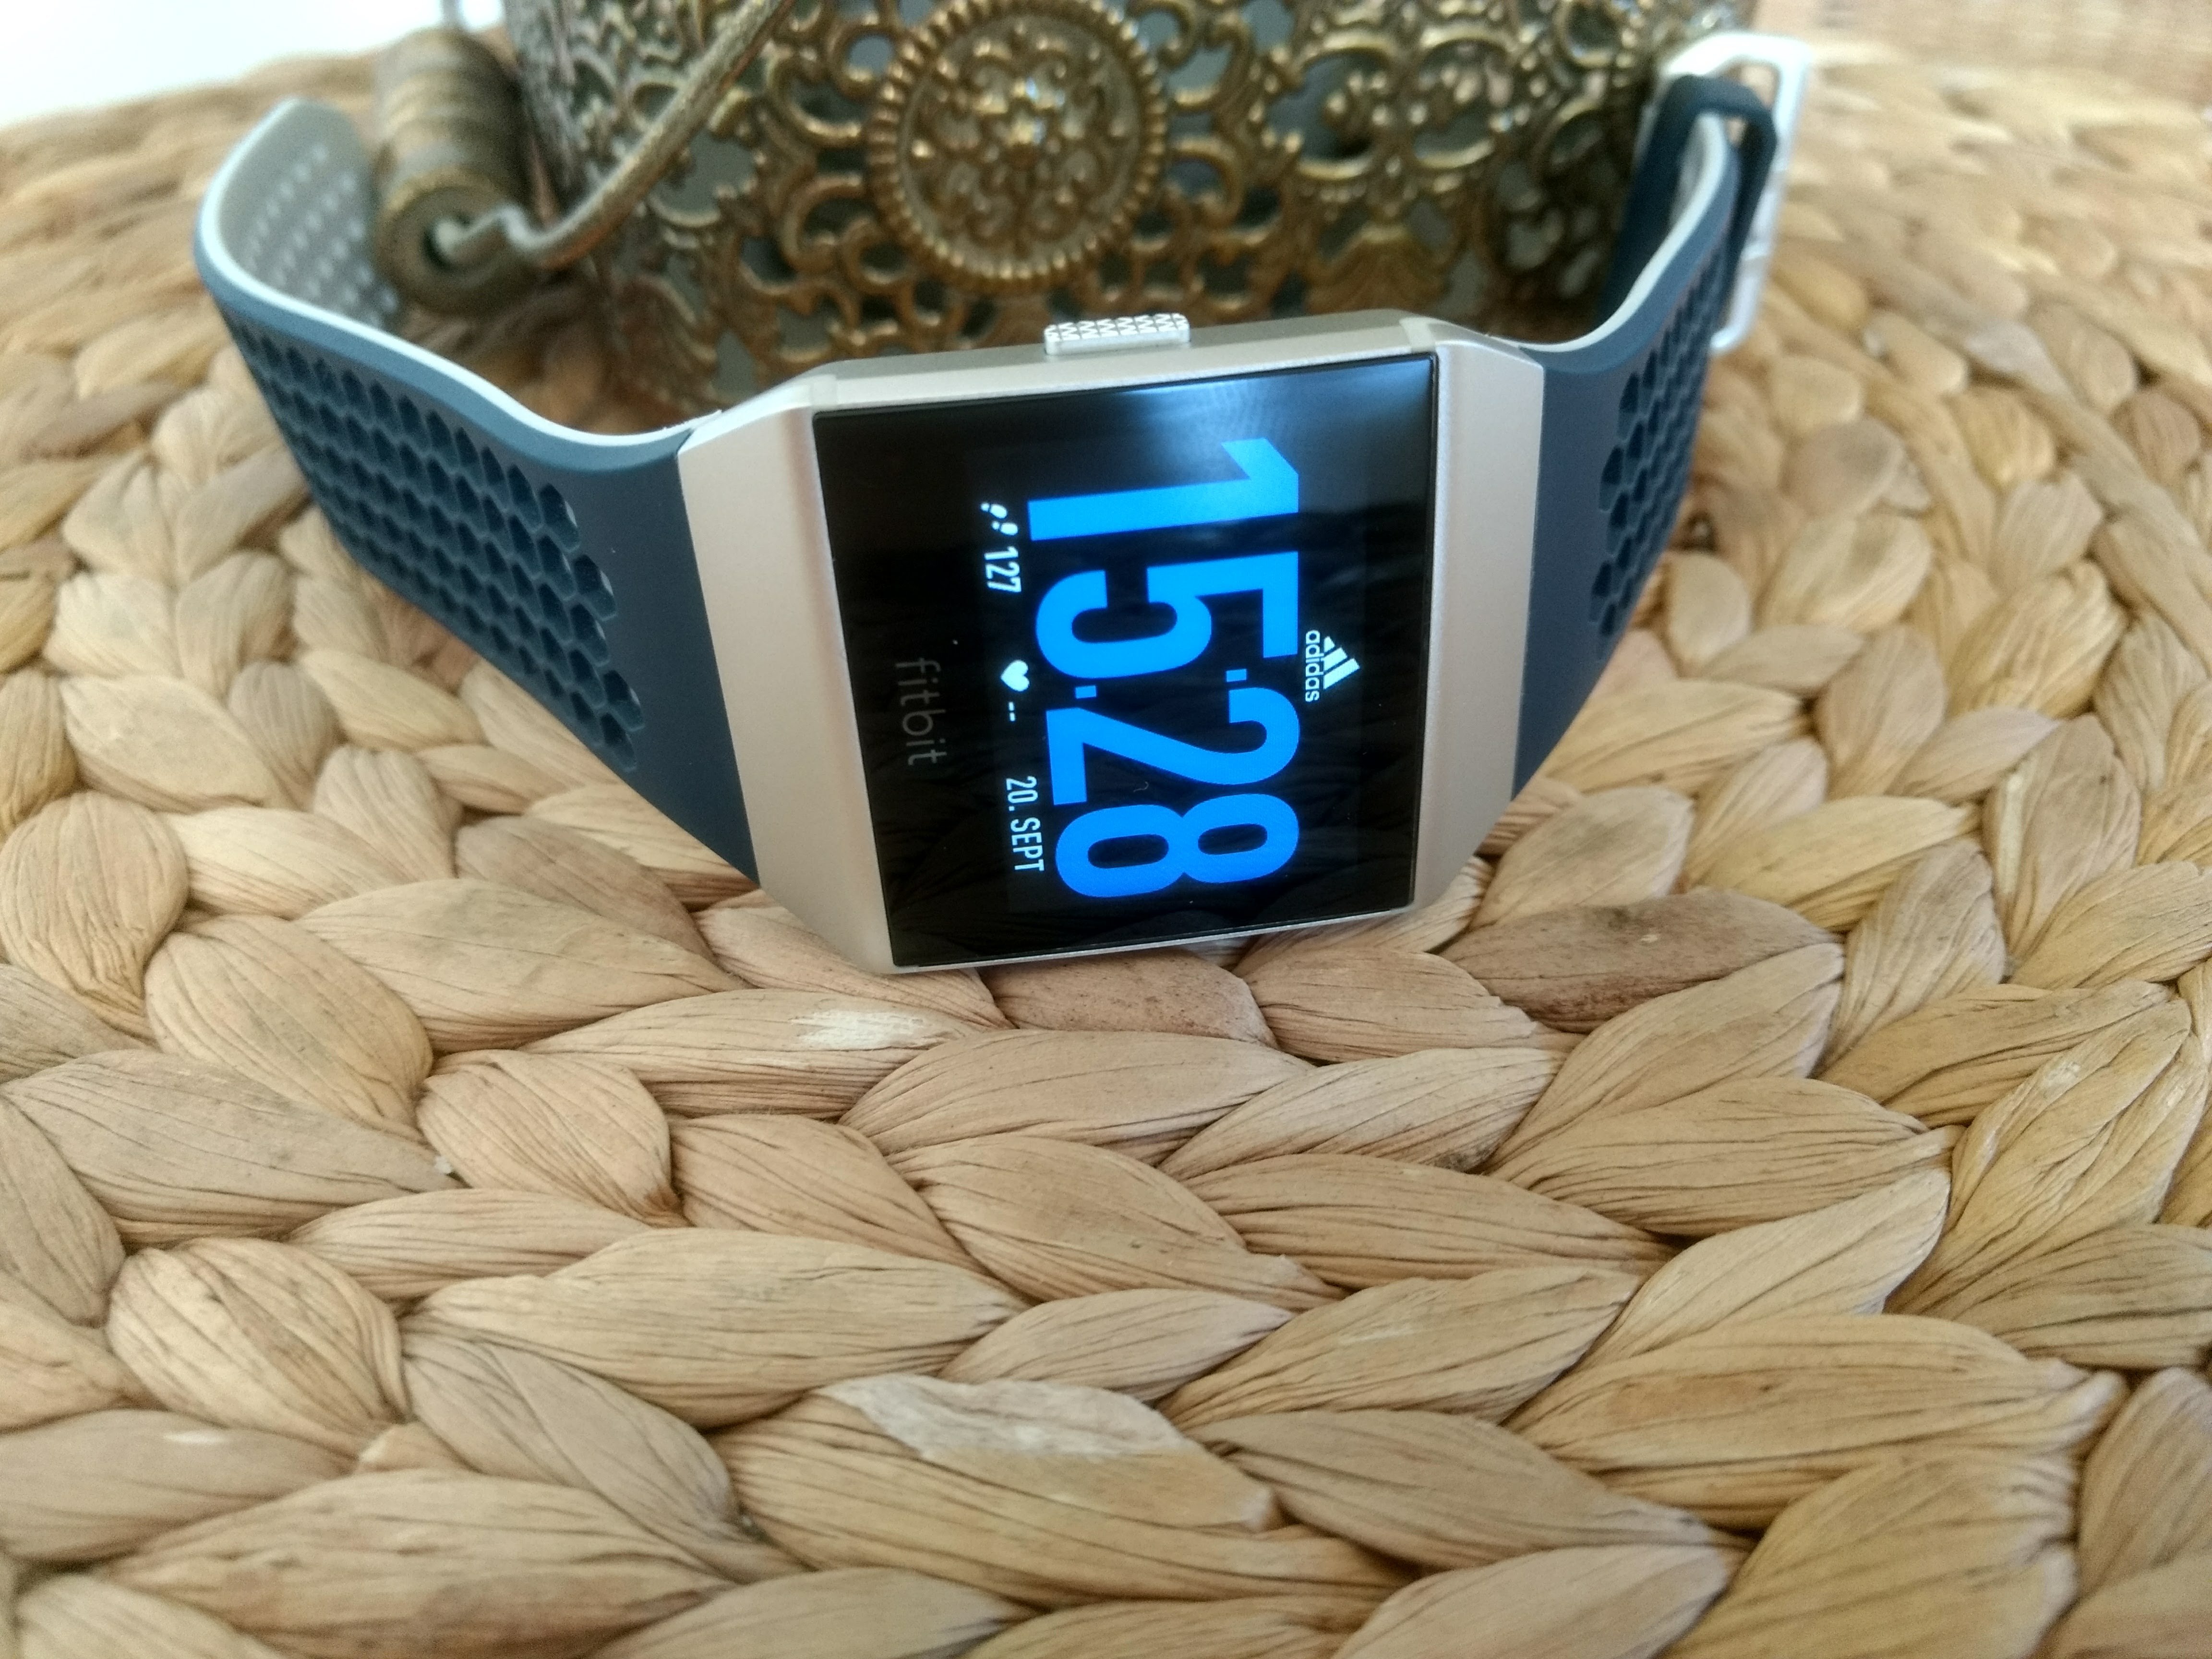 Aumentar playa Comorama Fitbit Ionic (Adidas Edition) review: The perfect watch for hobby athletes